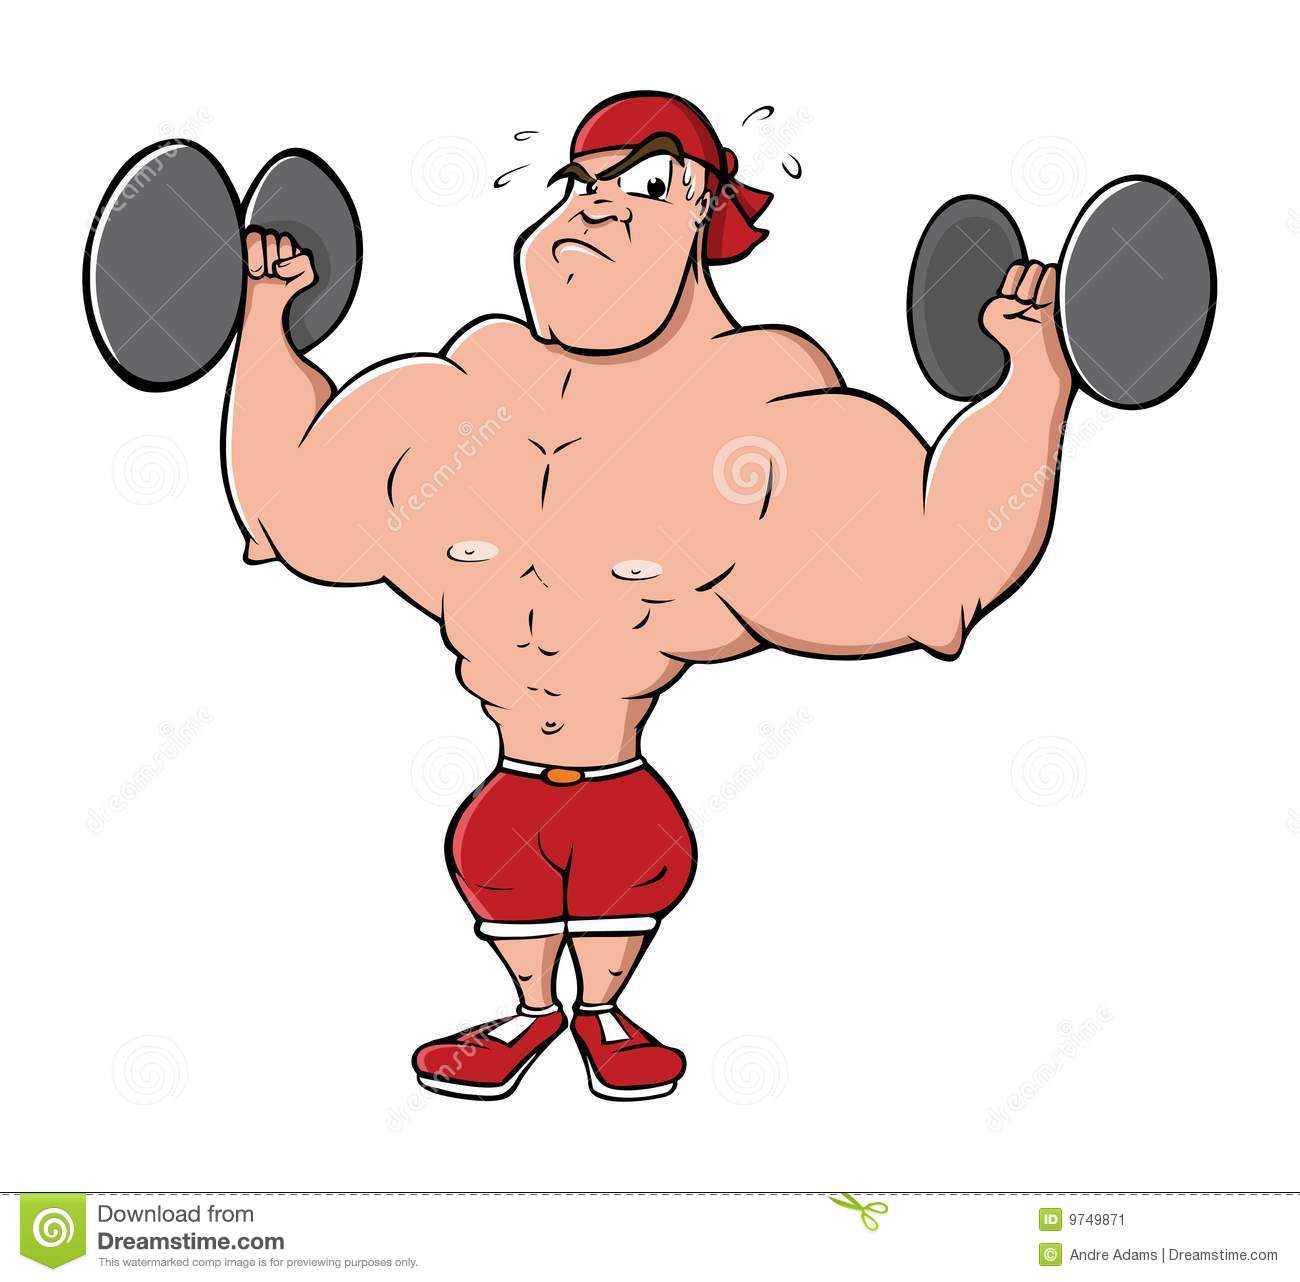 Bodybuilder Lifting Weights Stock Image   Image  9749871